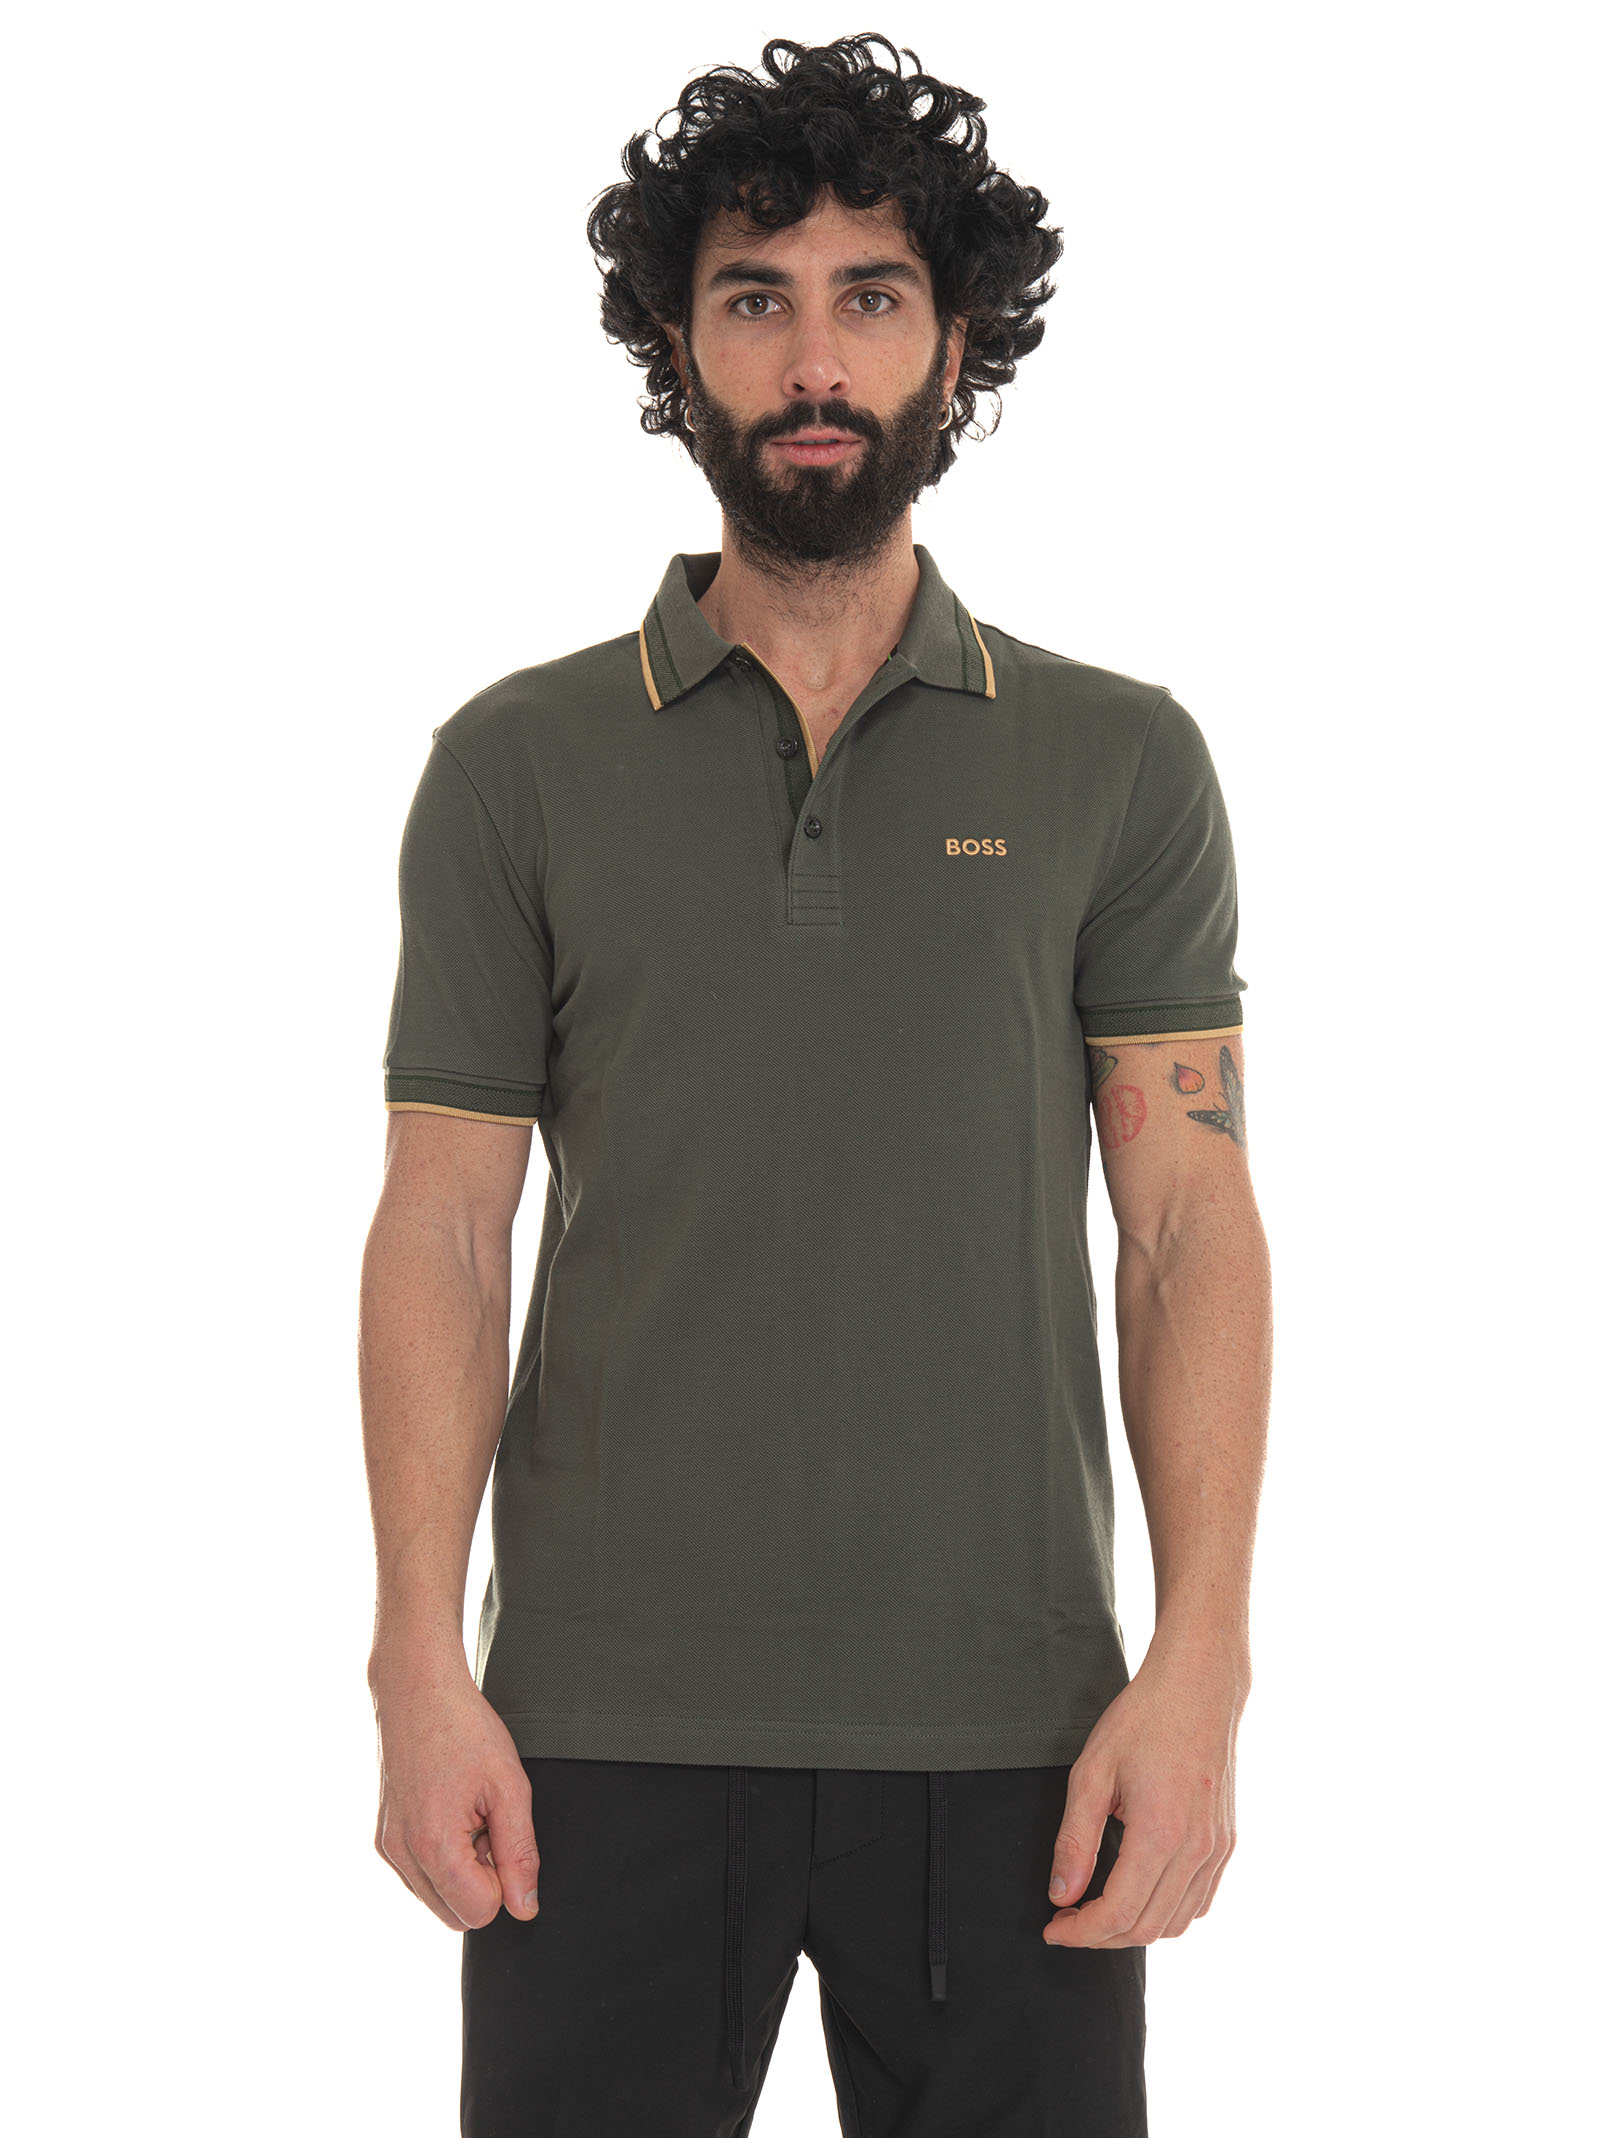 Hugo Boss Paddy Curved Cotton Shirt In Military Green